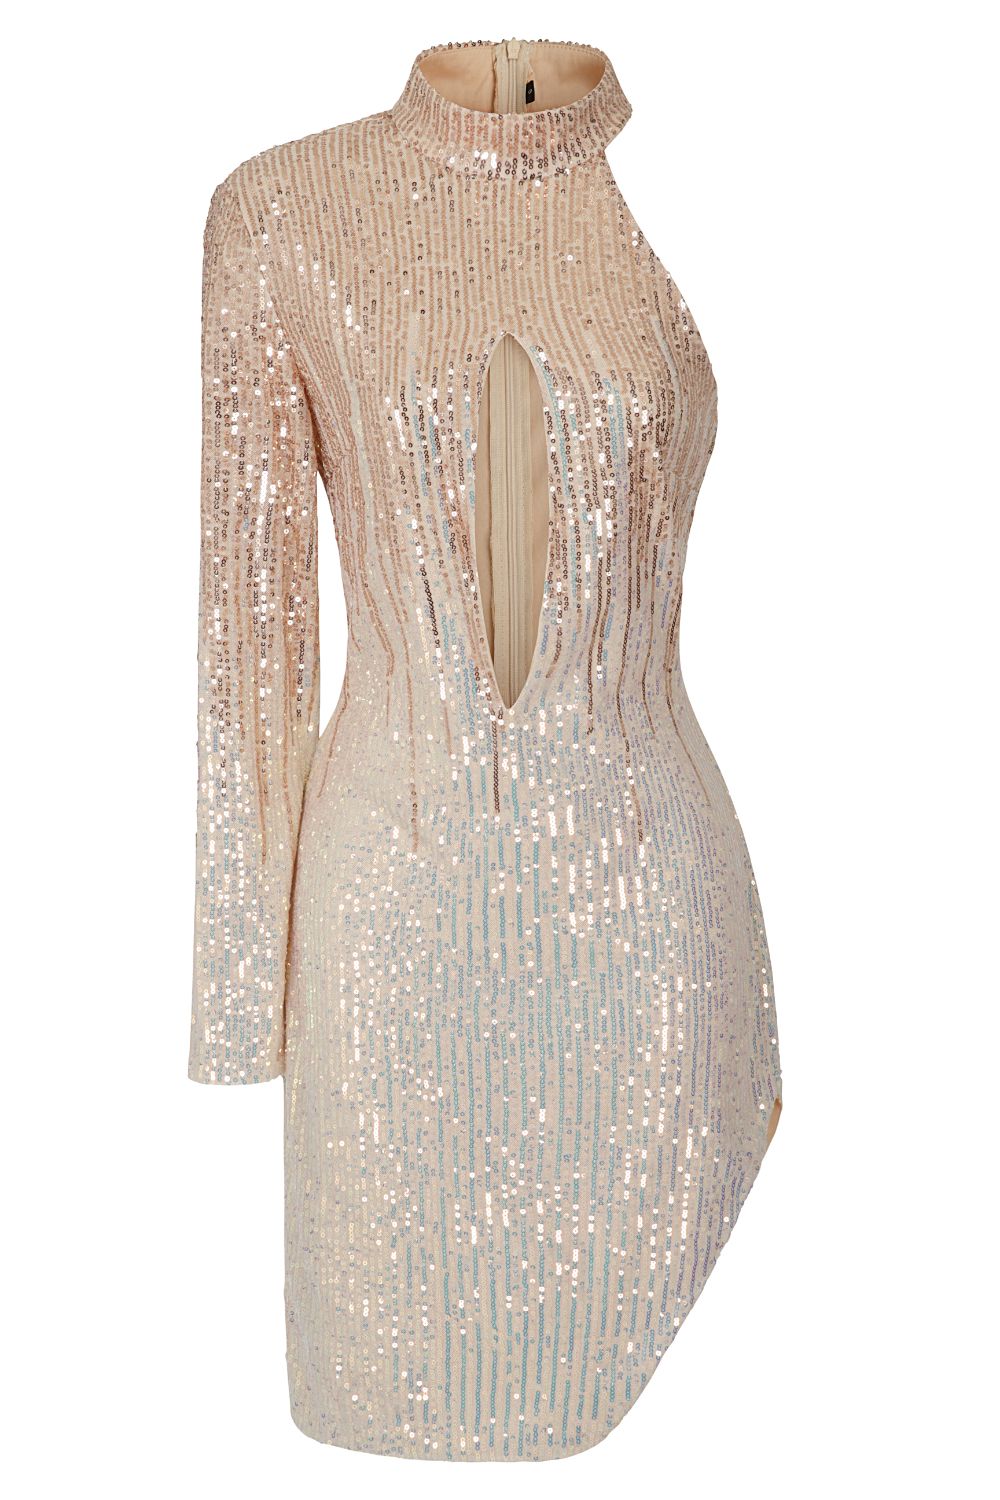 Be Mine Rose Gold Silver Ombre Sequin Keyhole One Sleeve Dress